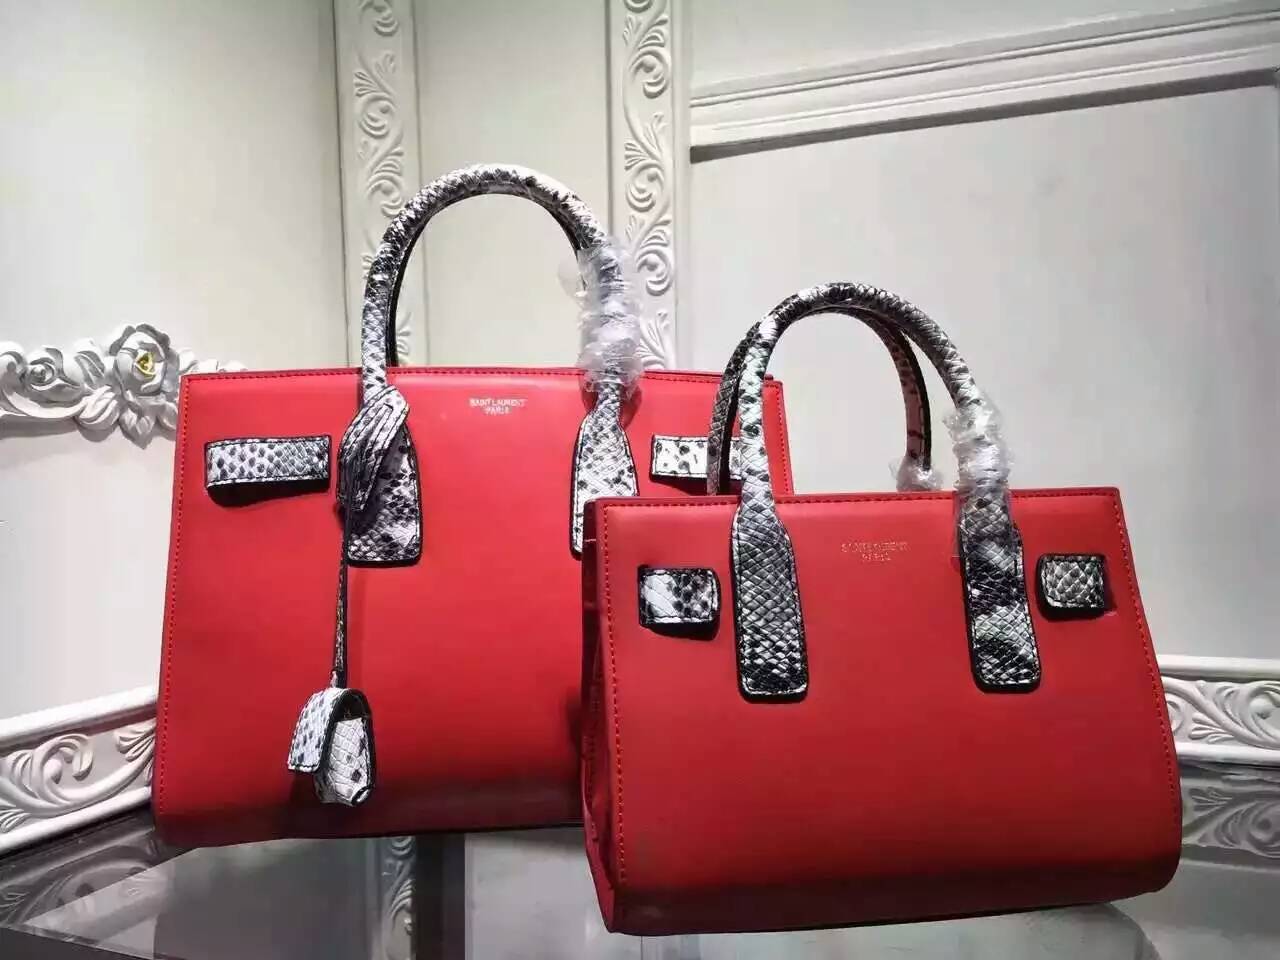 2016 New Saint Laurent Bag Cheap Sale-Saint Laurent Classic Sac De Jour Bag in Red Calfskin and Python Embossed Leather - Click Image to Close